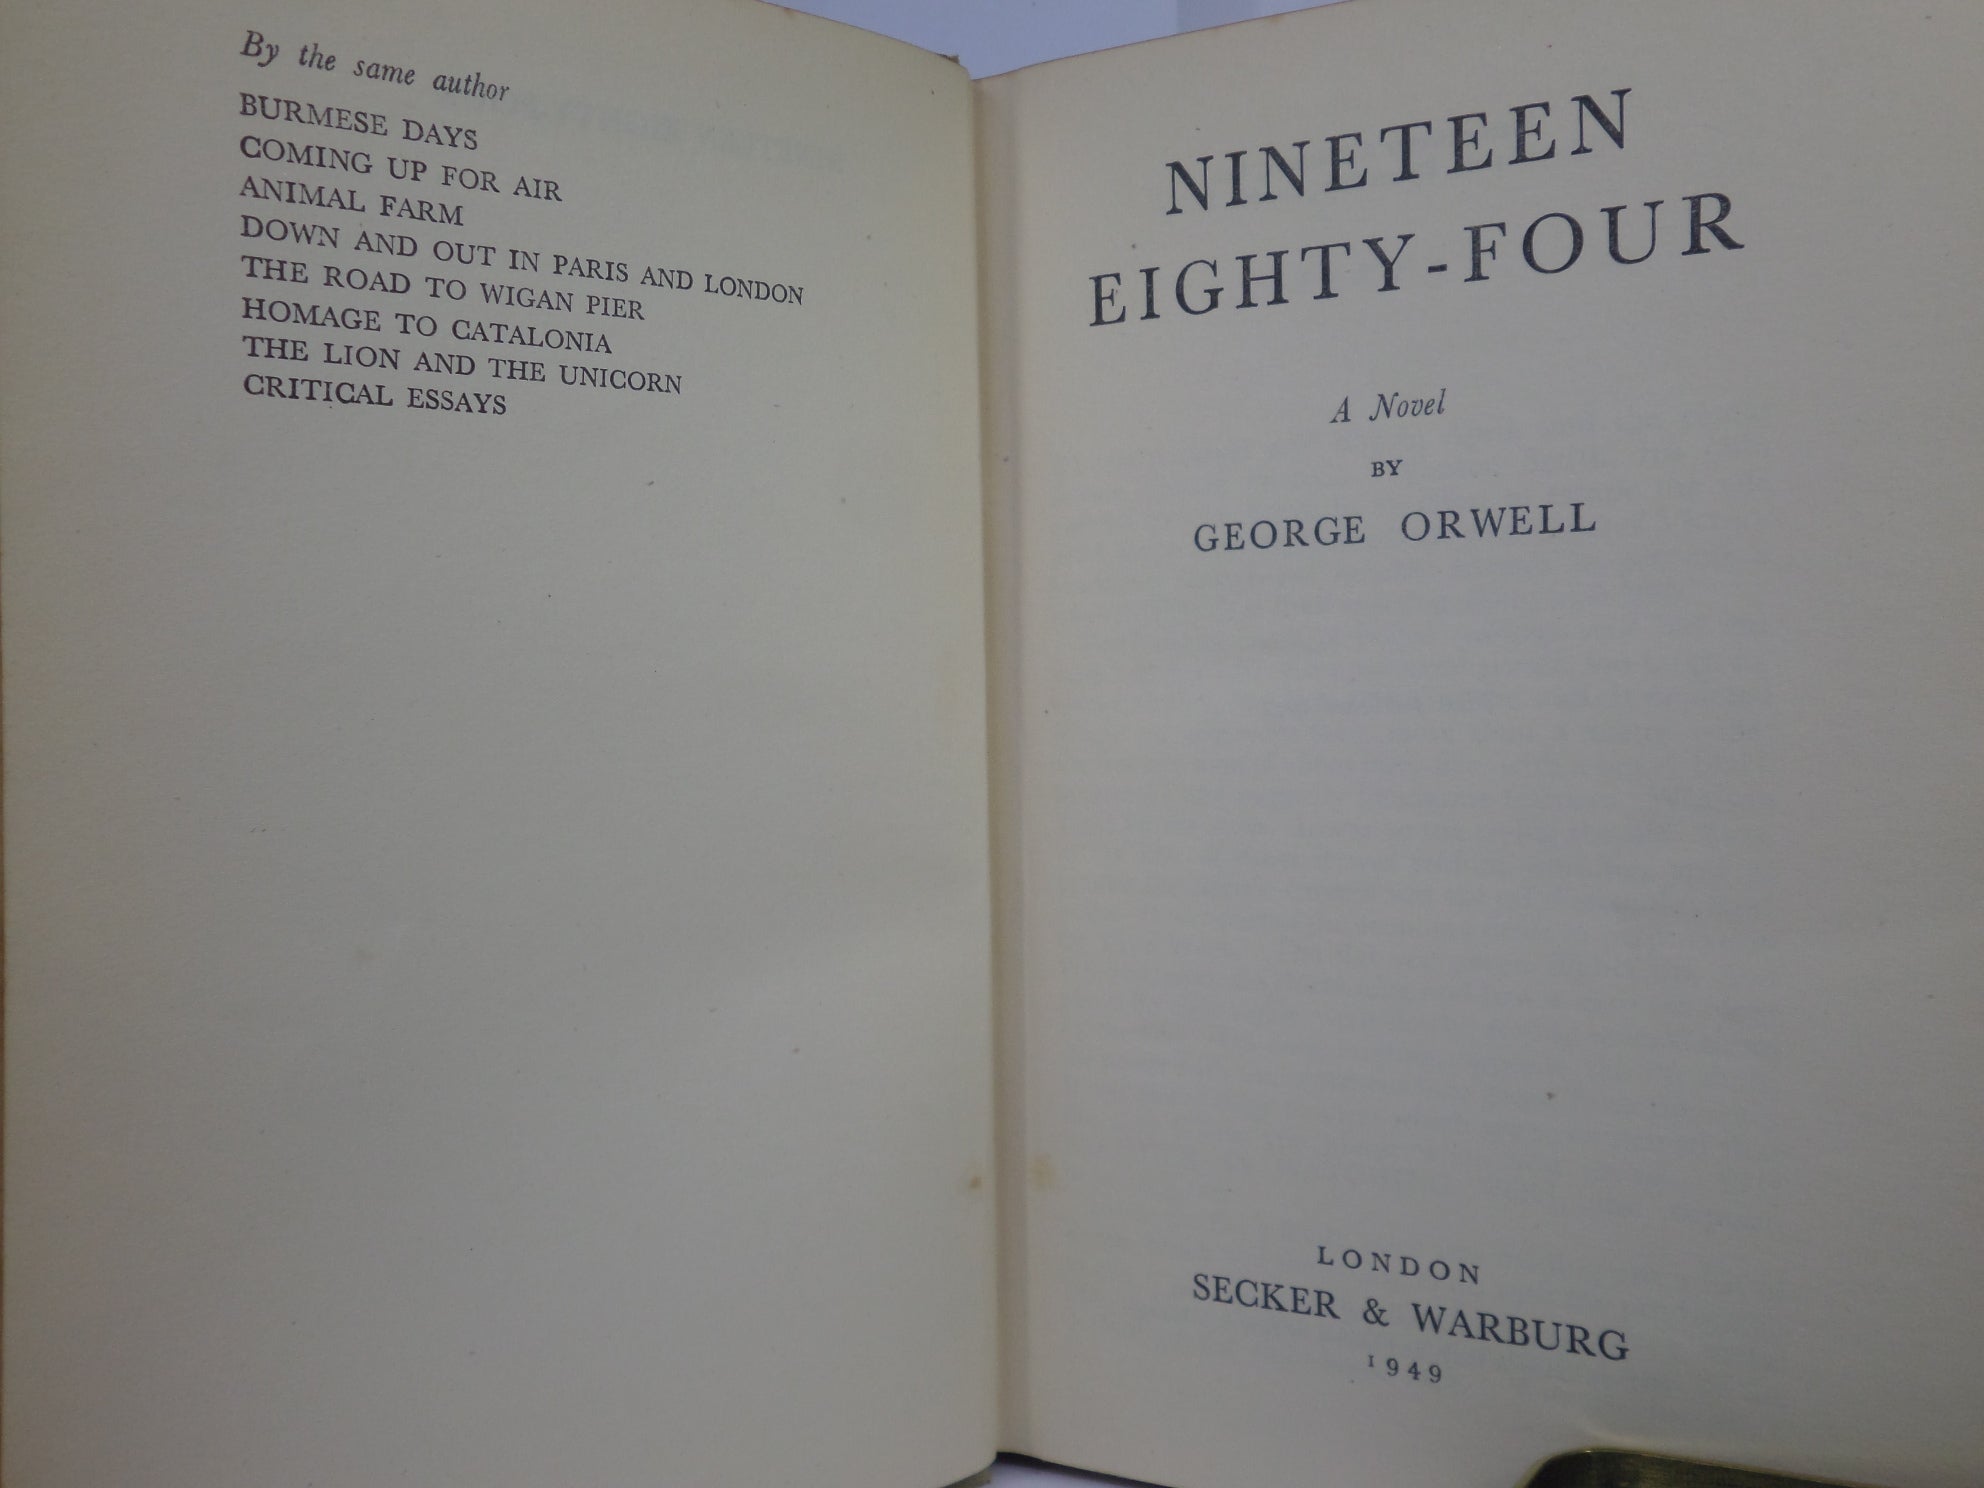 NINETEEN EIGHTY-FOUR BY GEORGE ORWELL 1949 RARE FIRST EDITION